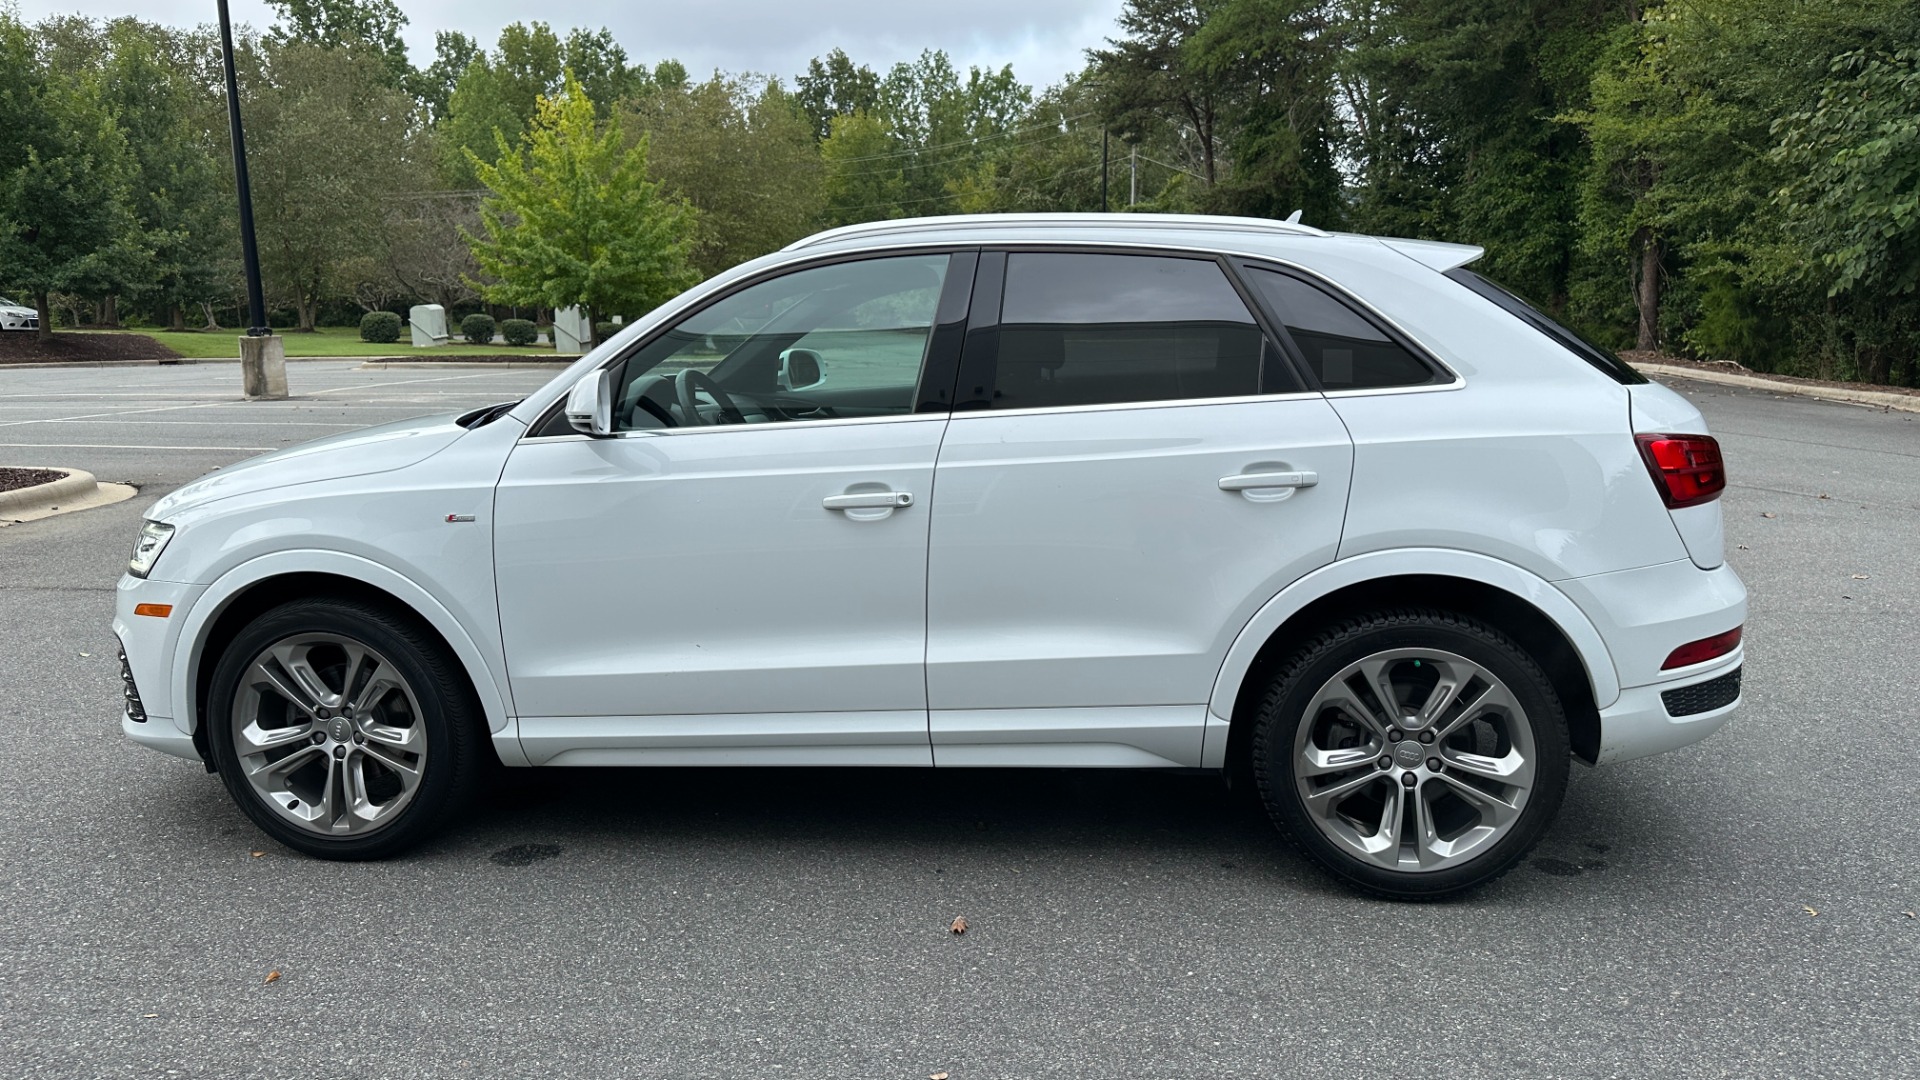 Used 2017 Audi Q3 PRESTIGE / PANORAMIC ROOF / NAV / HEATED SEATS for sale $22,795 at Formula Imports in Charlotte NC 28227 3